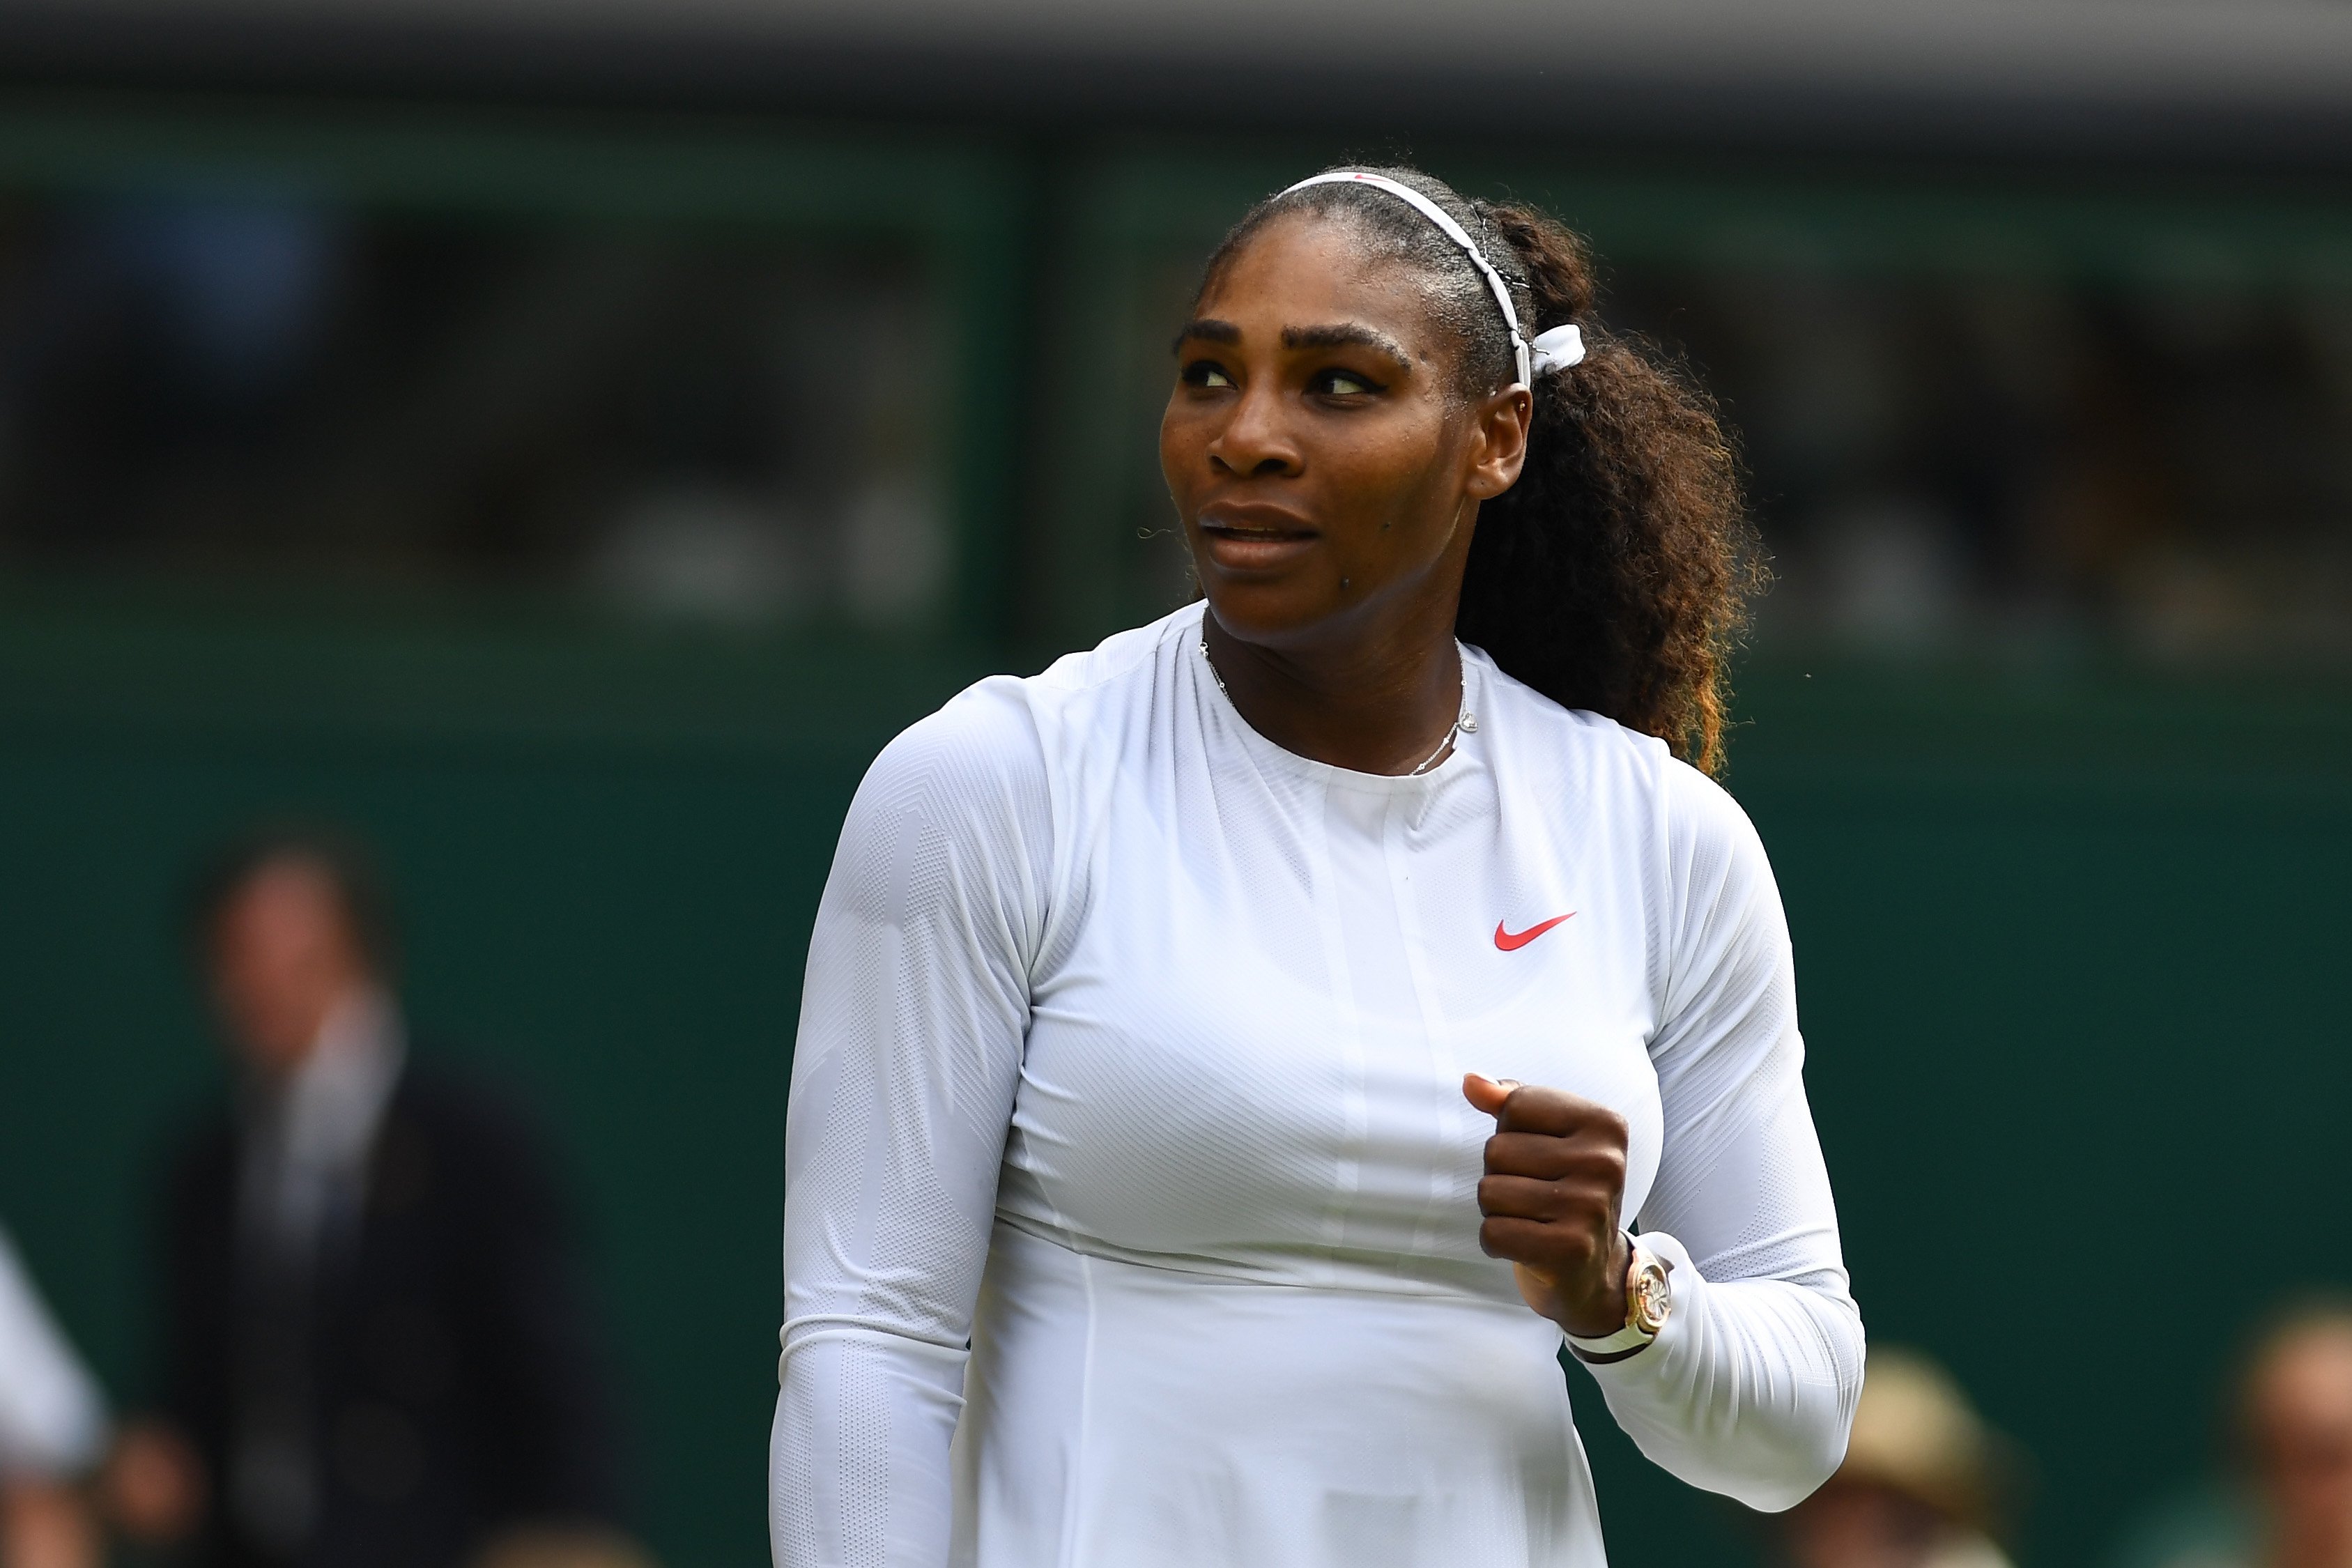 Serena Williams on day seven of the Wimbledon Lawn Tennis Championships on July 9, 2018 in London, England| Photo: Getty Images